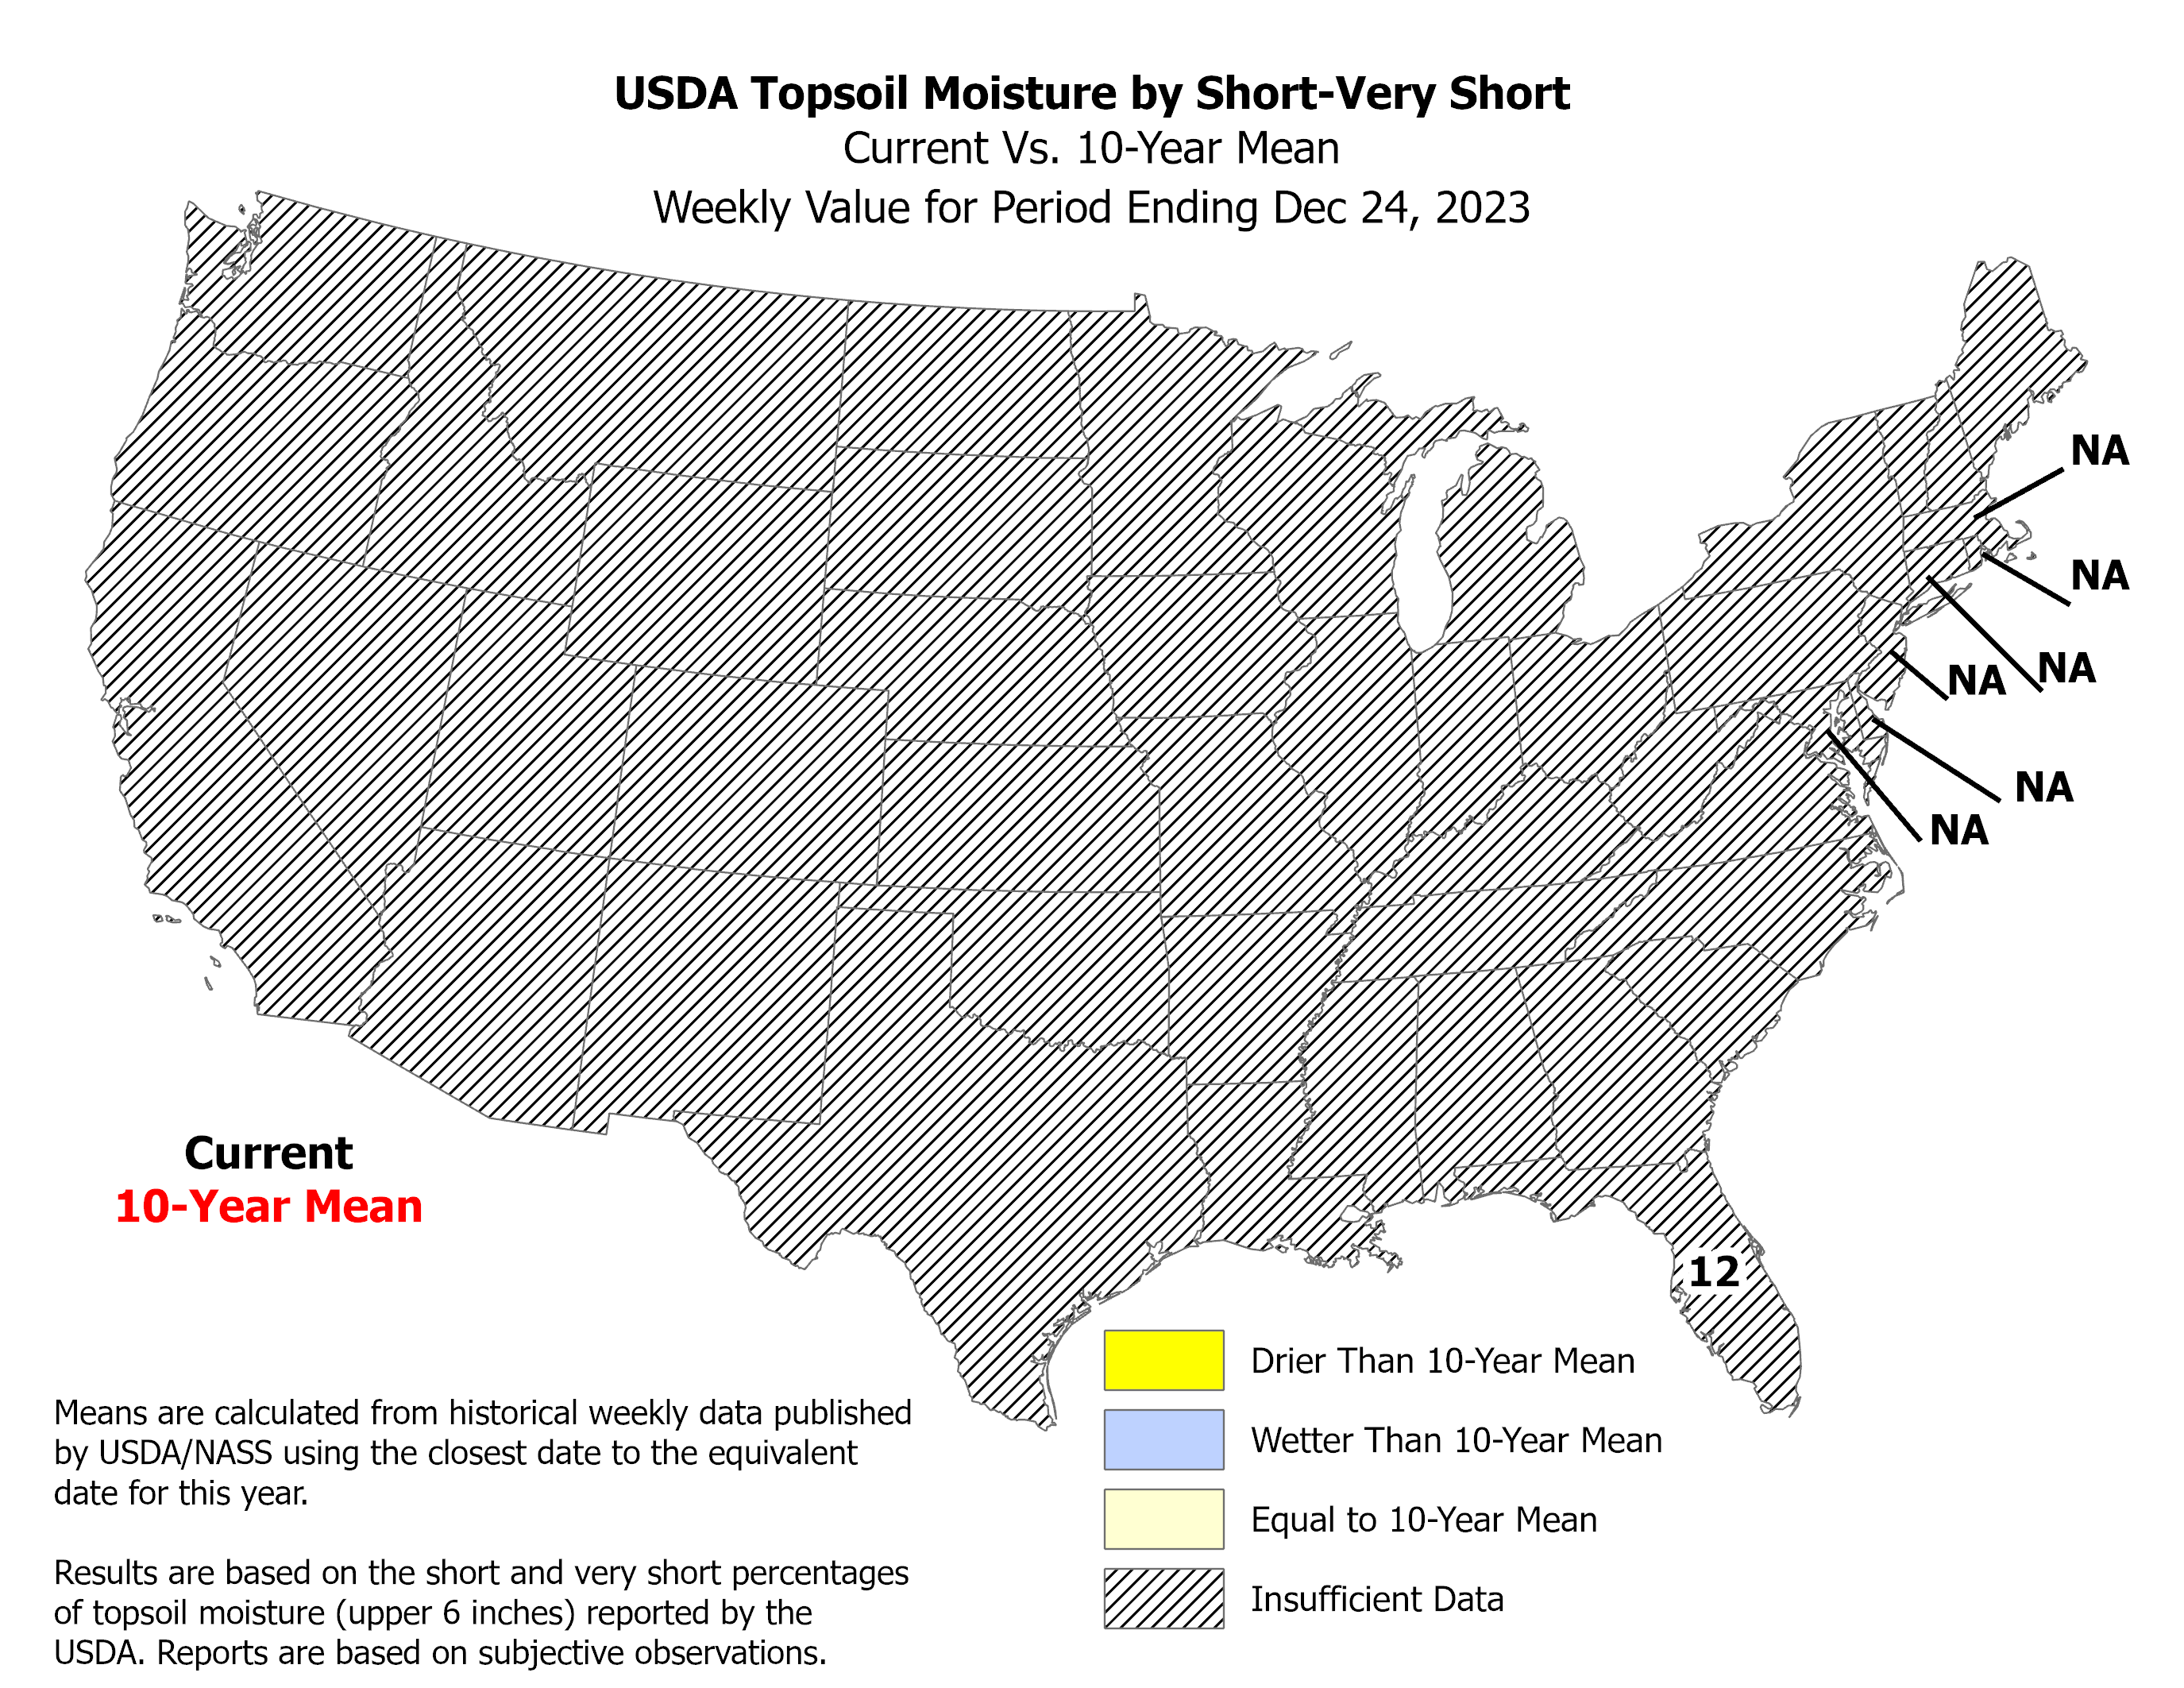 USDA Topsoil Moisture by Short-VeryShort, current vs 10 year mean